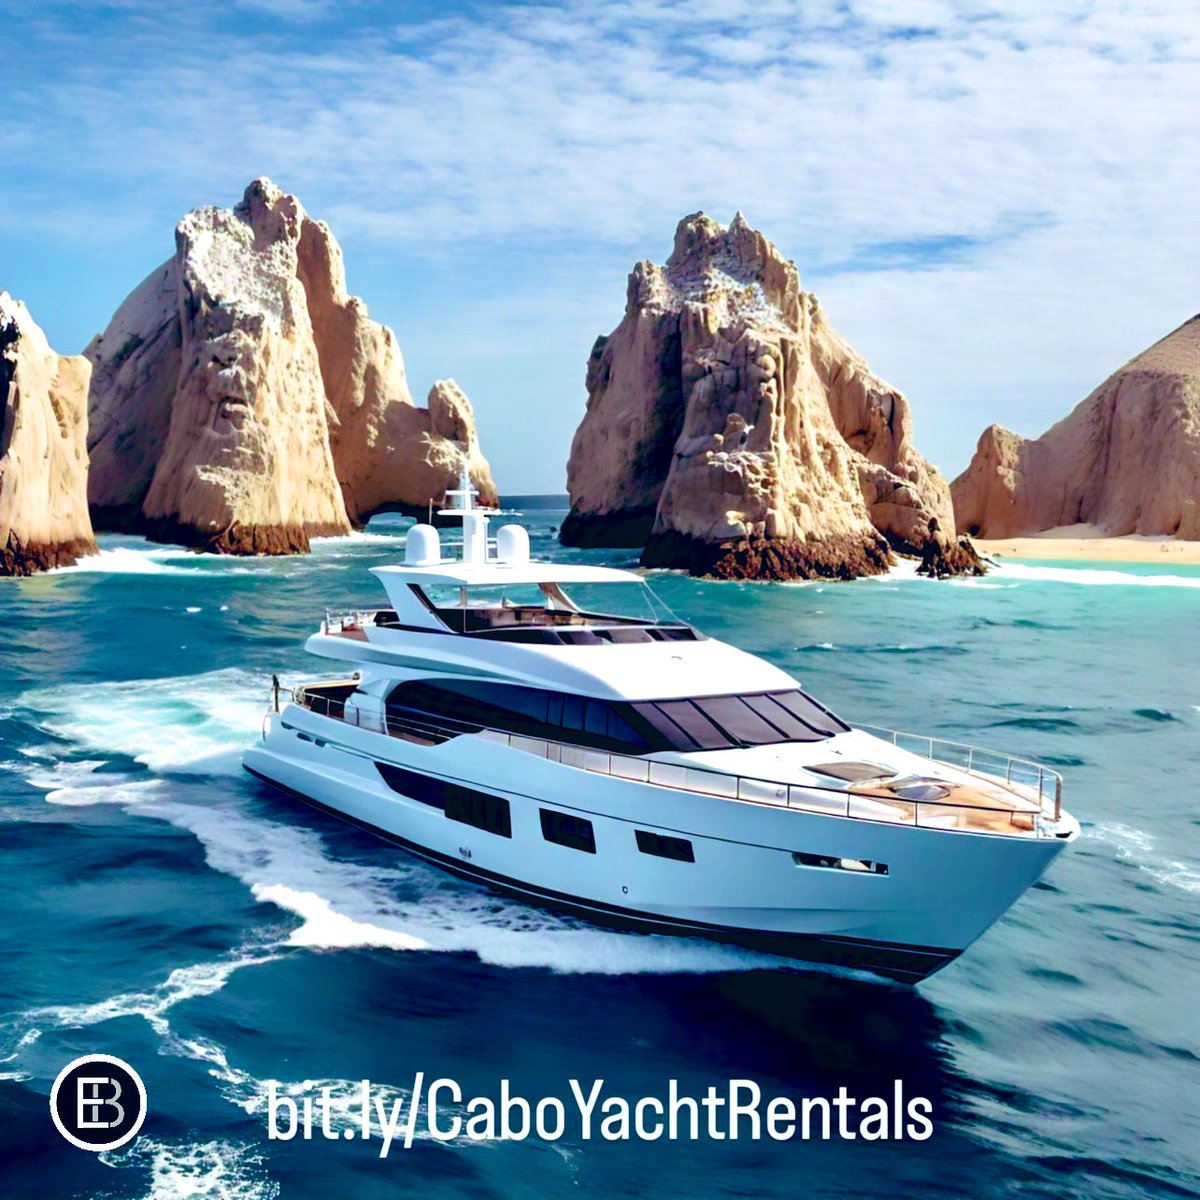 Set Sail in Los Cabos with #EliteBrandsCo 👀 

#YachtRental #YachtRentals #CaboYachtRentals #LosCabos #LosCabosMexico #CaboSanLucas #LosCabosYachtRentals #LosCabosYachts #Mexico #AnchorRides #EliteBrands 

Our yacht rentals in Los Cabos offer unparalleled luxury and comfort,